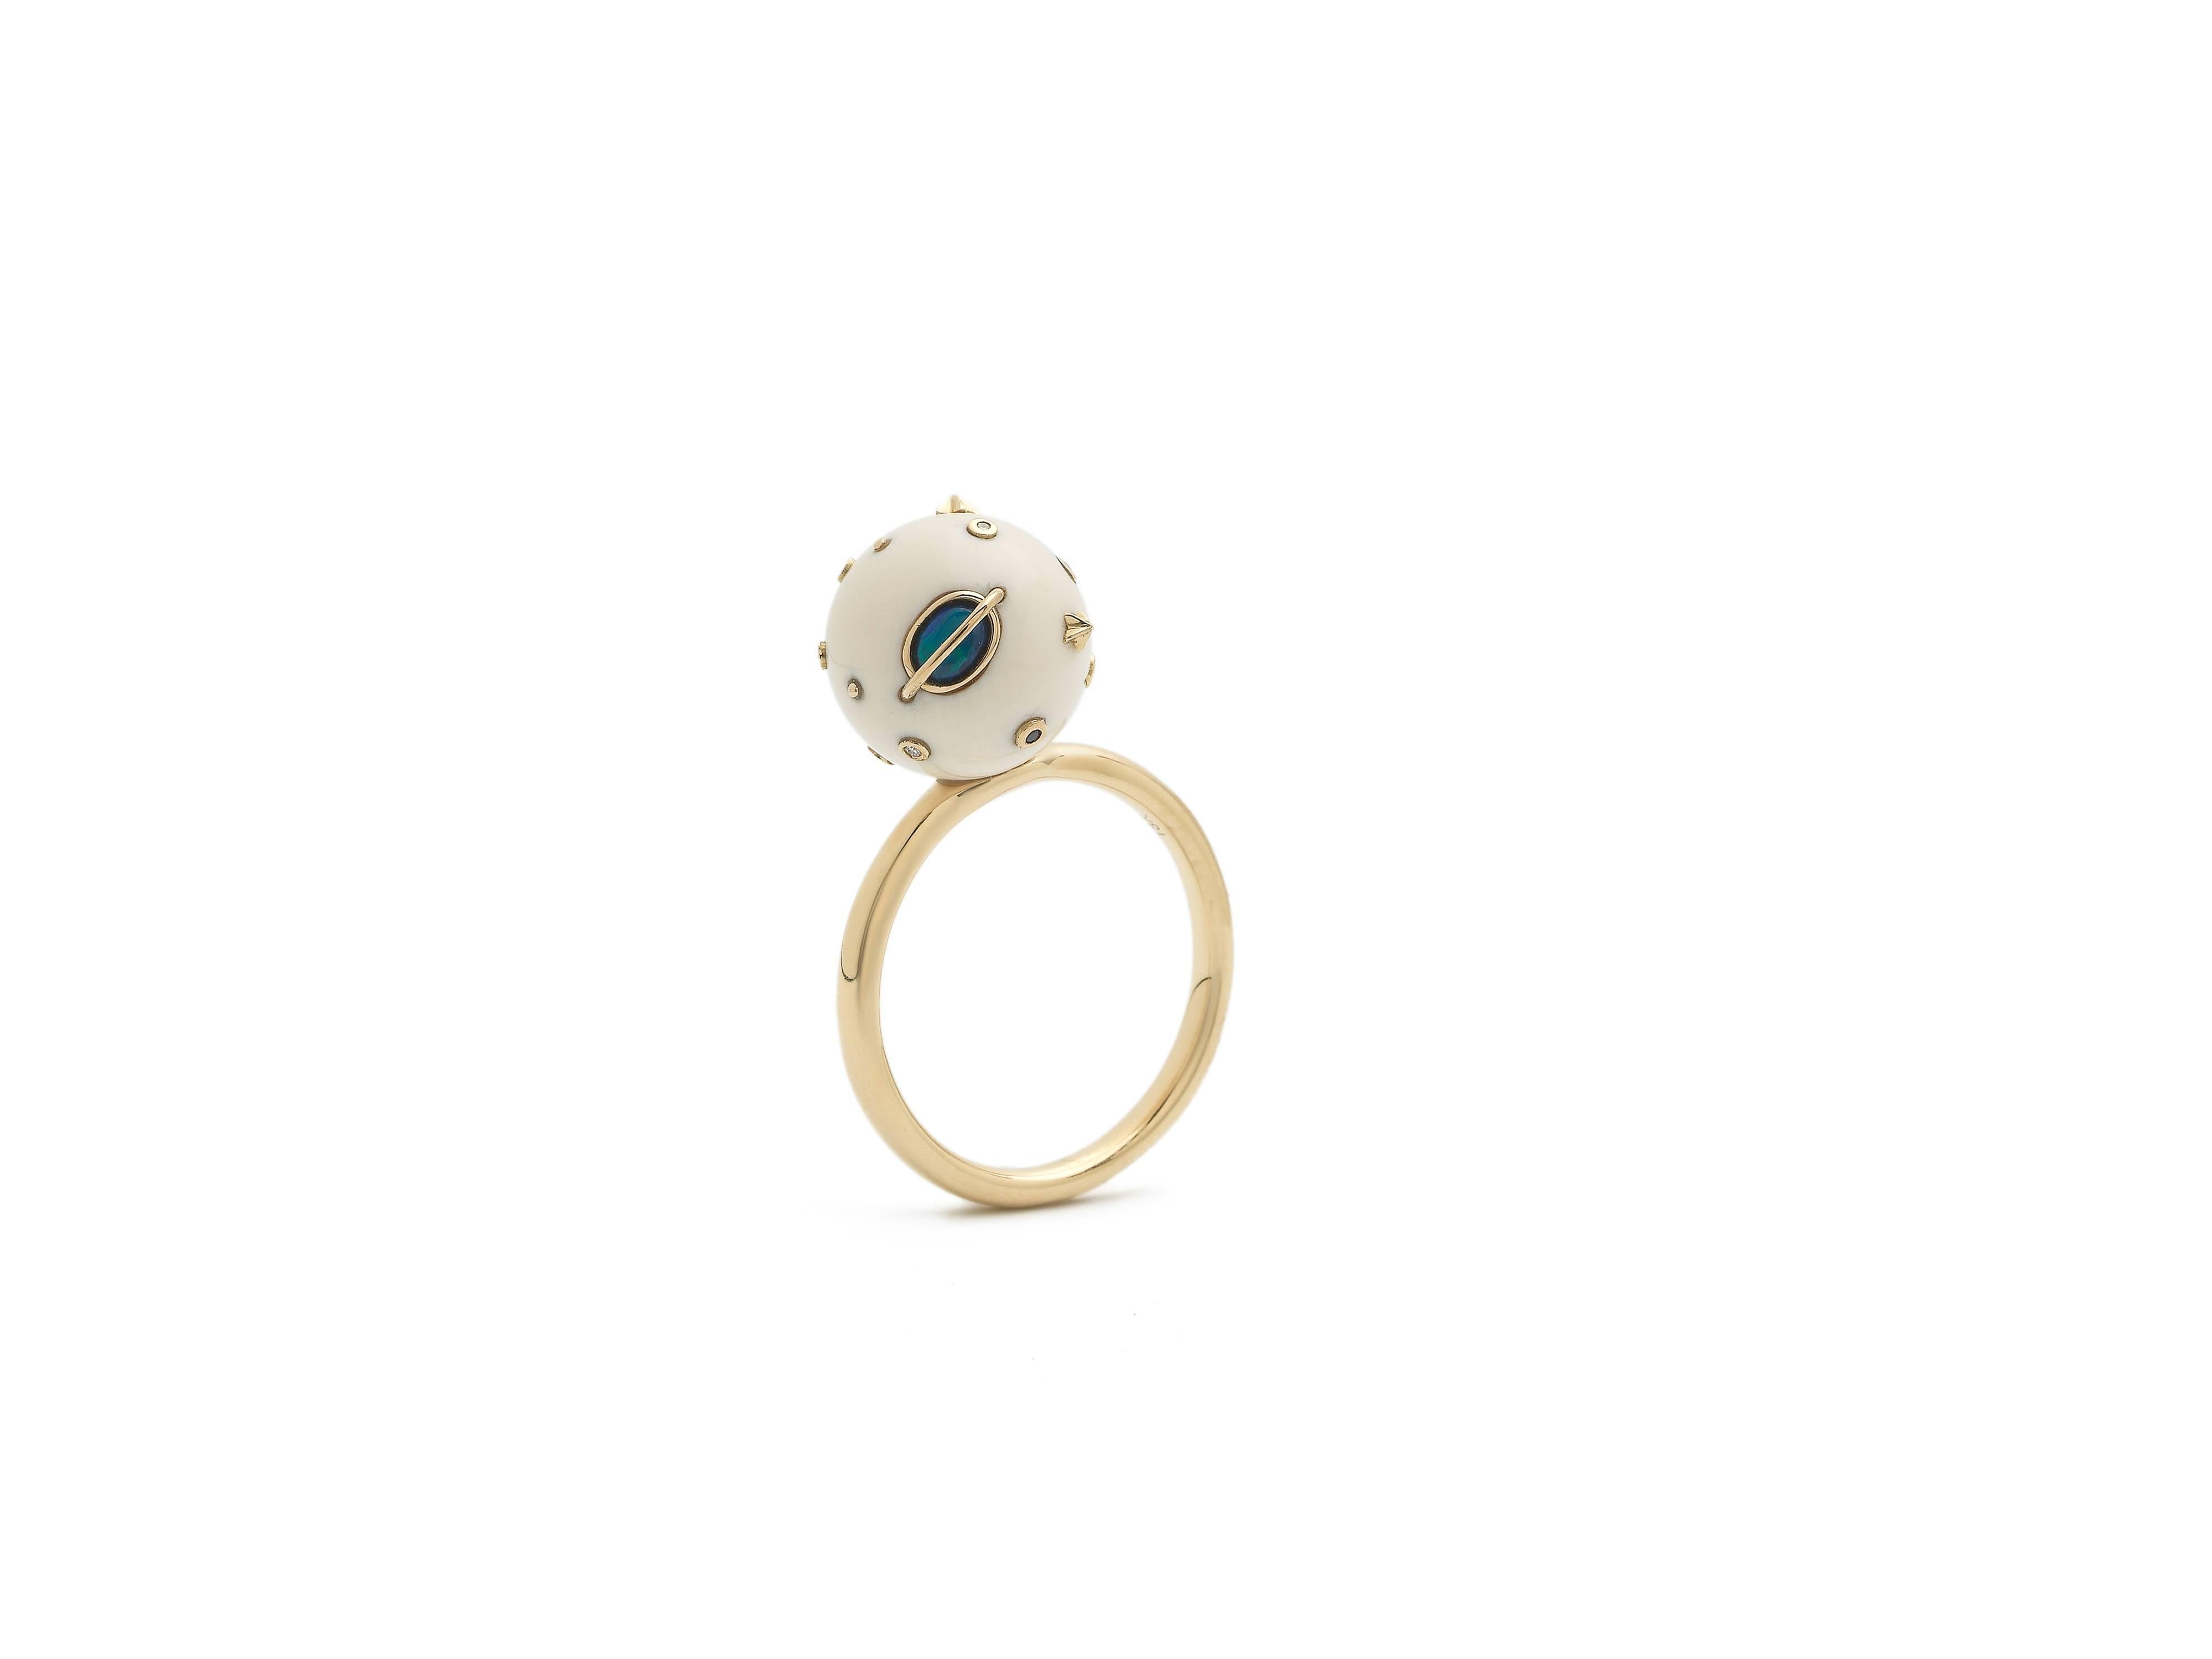 The Small Mammoth Galaxy Ring, by Bibi van der Velden, combines 18k Yellow Gold with 40,000 year old Mammoth Tusk, Opals, Diamonds and Blue Sapphires. This ring is from the Galaxy Collection, inspired by the mysterious and intriguing cosmos we live